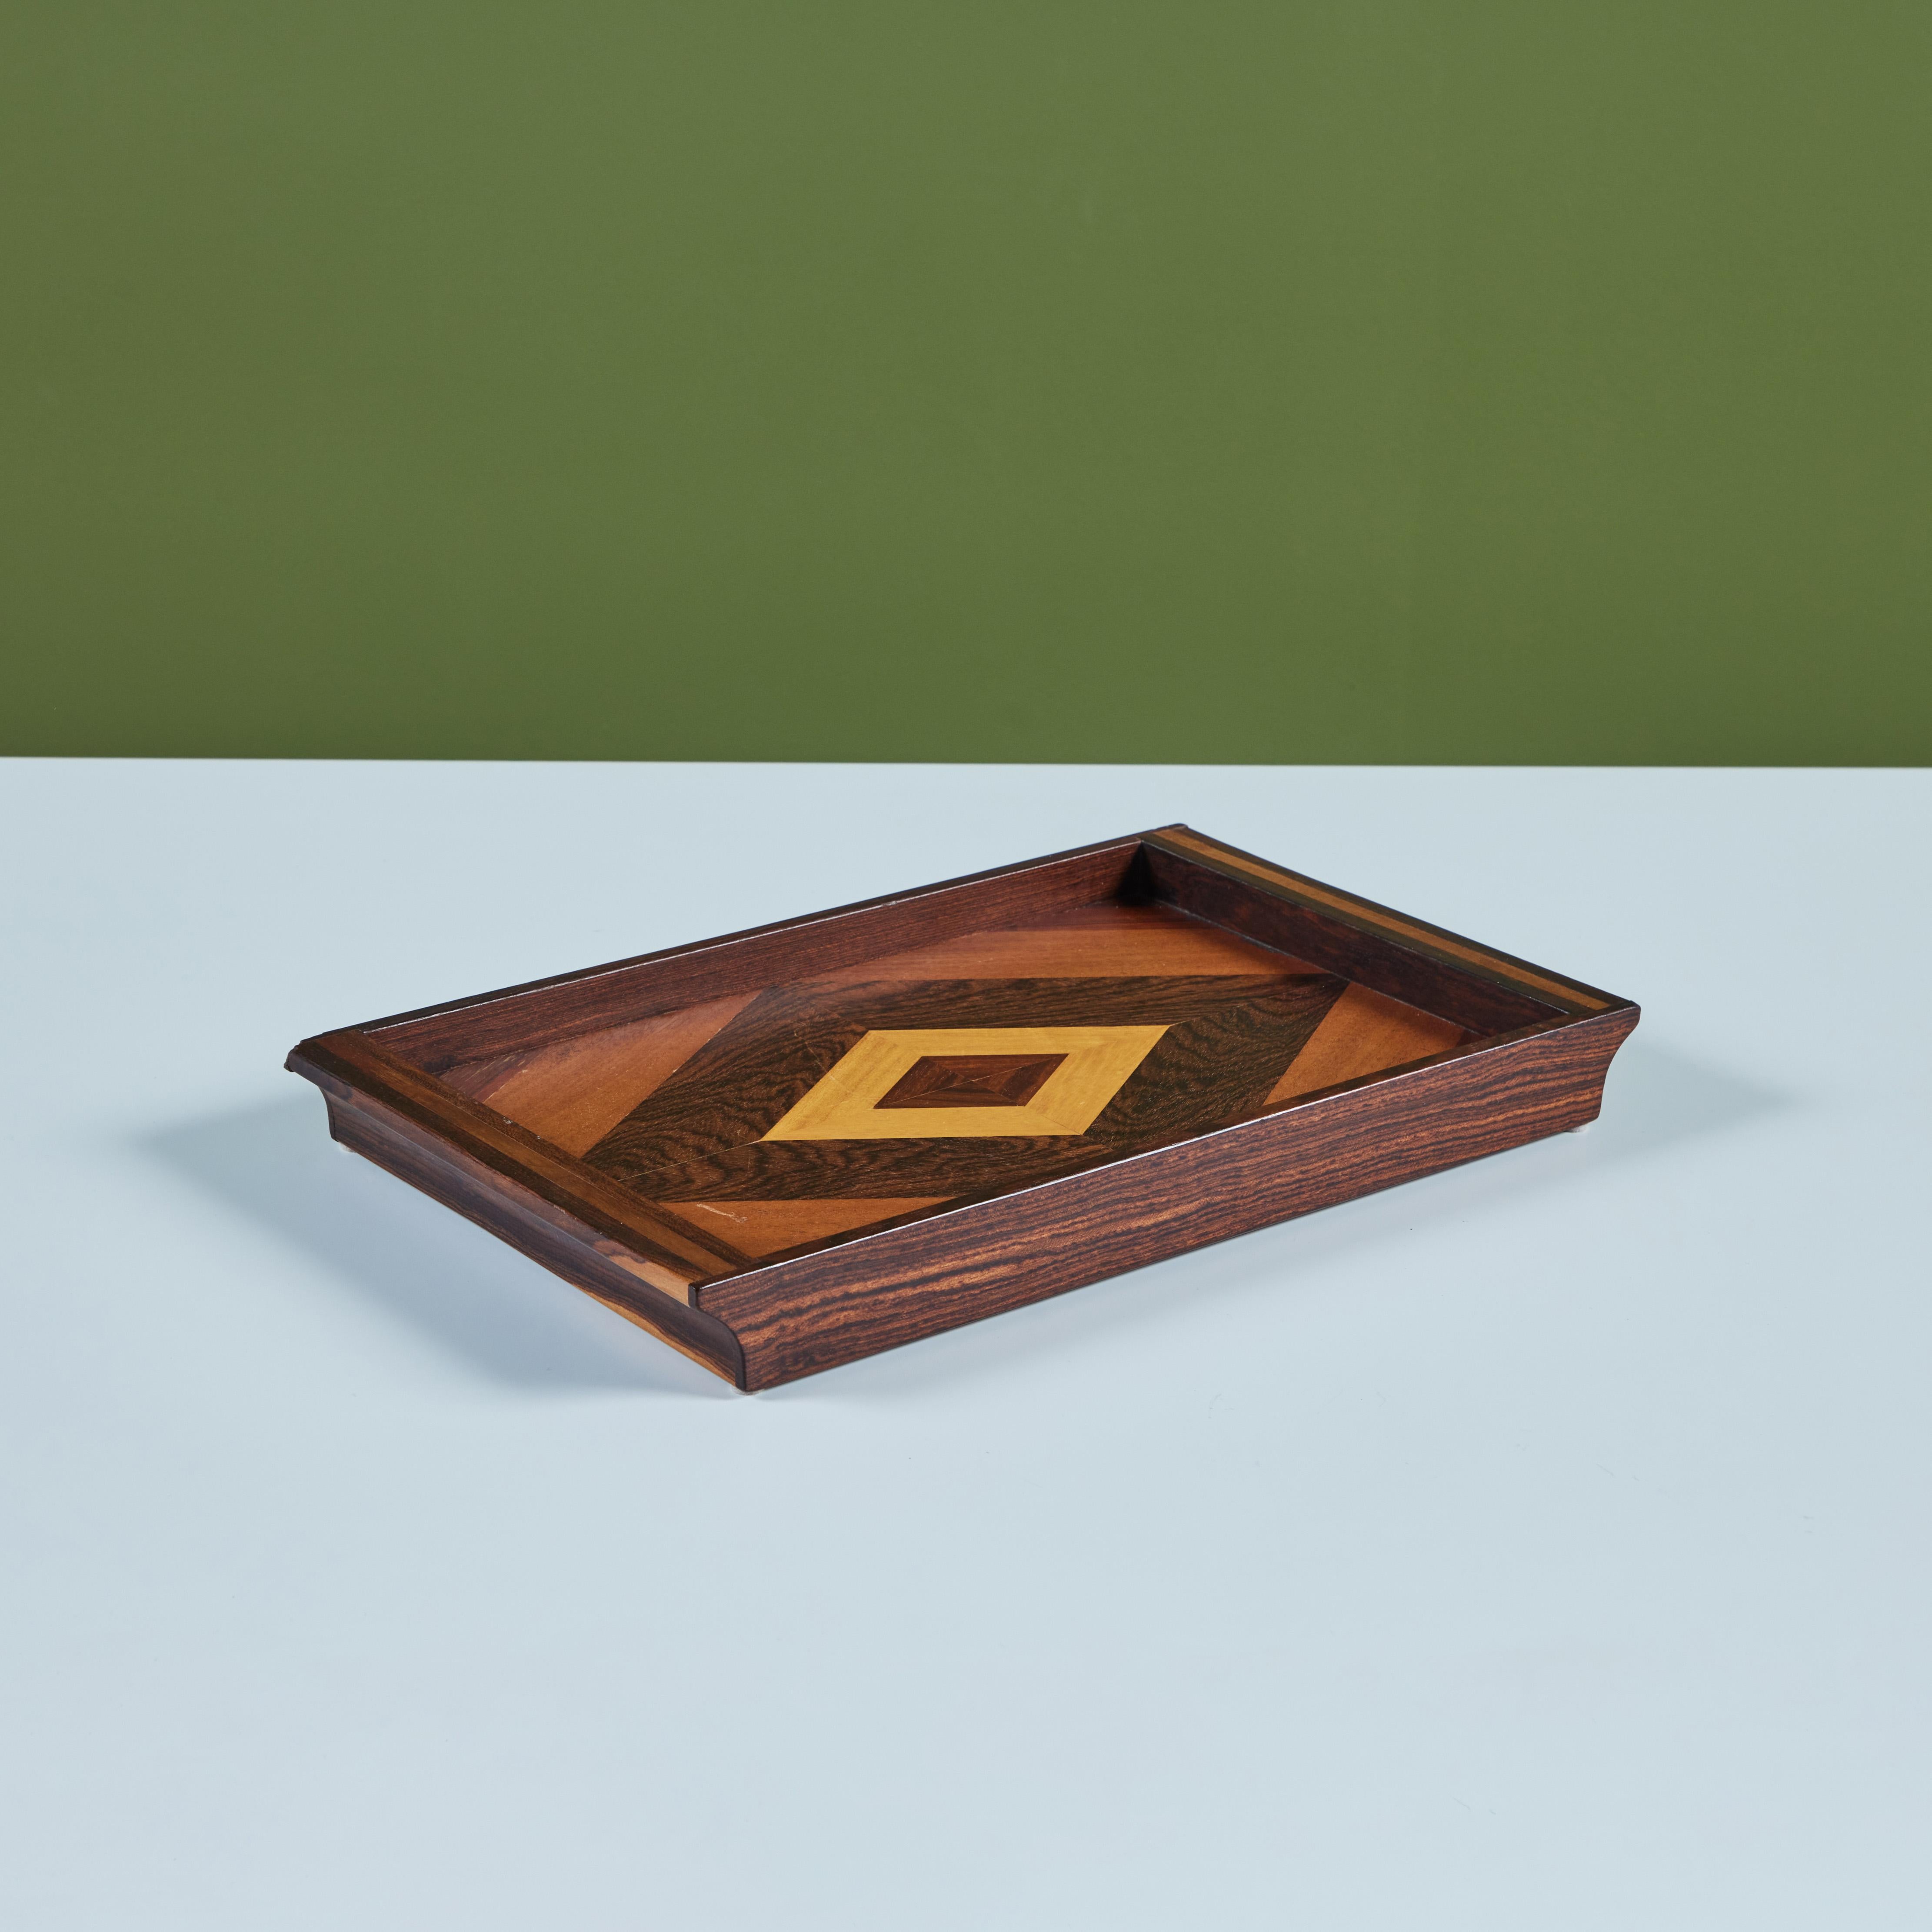 Serving tray by Don Shoemaker for Senal of Mexico. The tray has a dark rosewood frame with integrated handles at either end, and the tray surface is inlaid with precious wood veneer in a diamond pattern.

CITES Notice: Due to stringent regulations